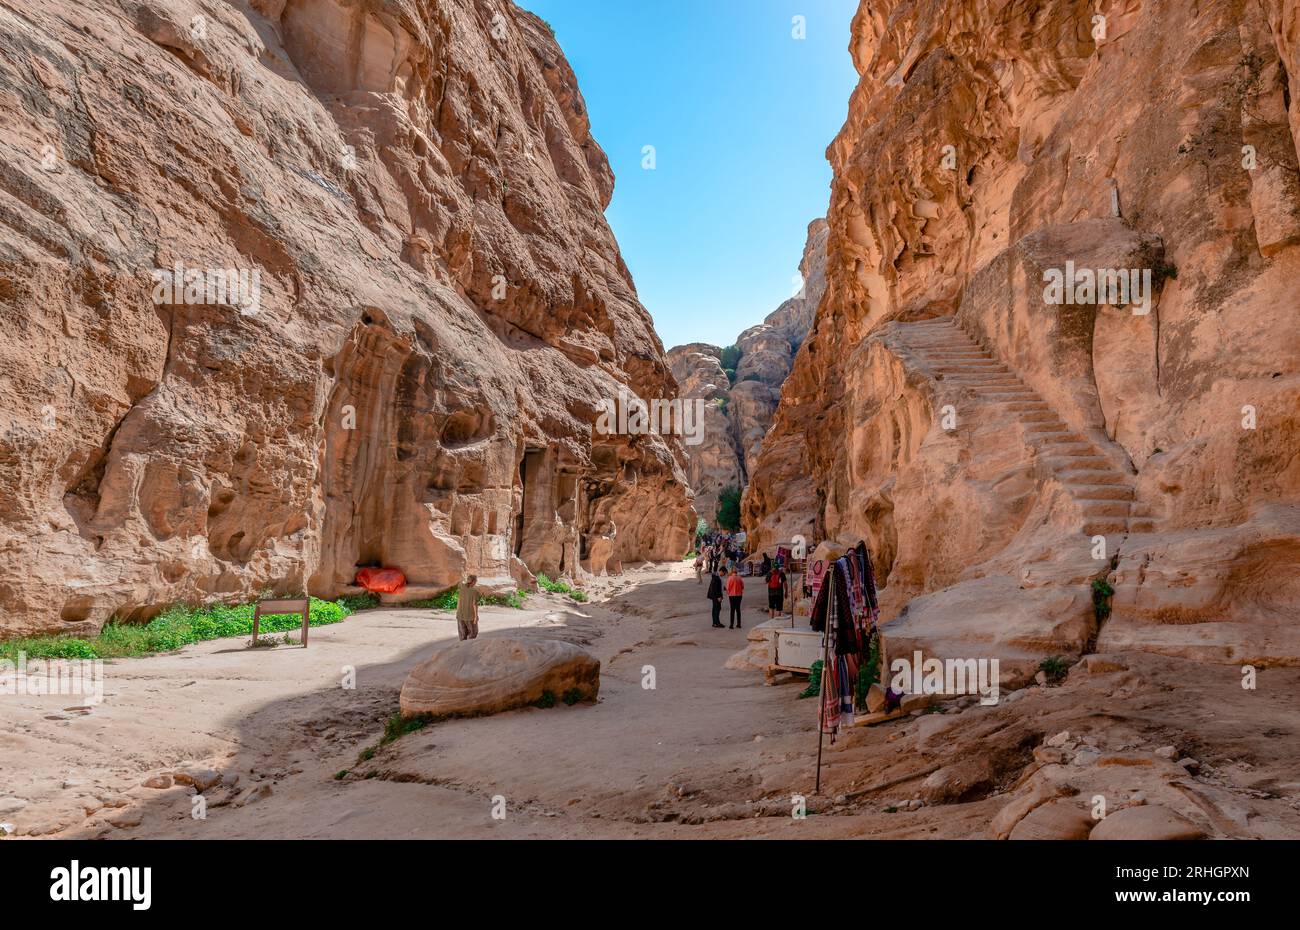 View of Siq Al-Barid (means Cold Canyon) in Little Petra, an ancient Nabataean site, with buildings carved into the walls of the sandstone canyons. Stock Photo